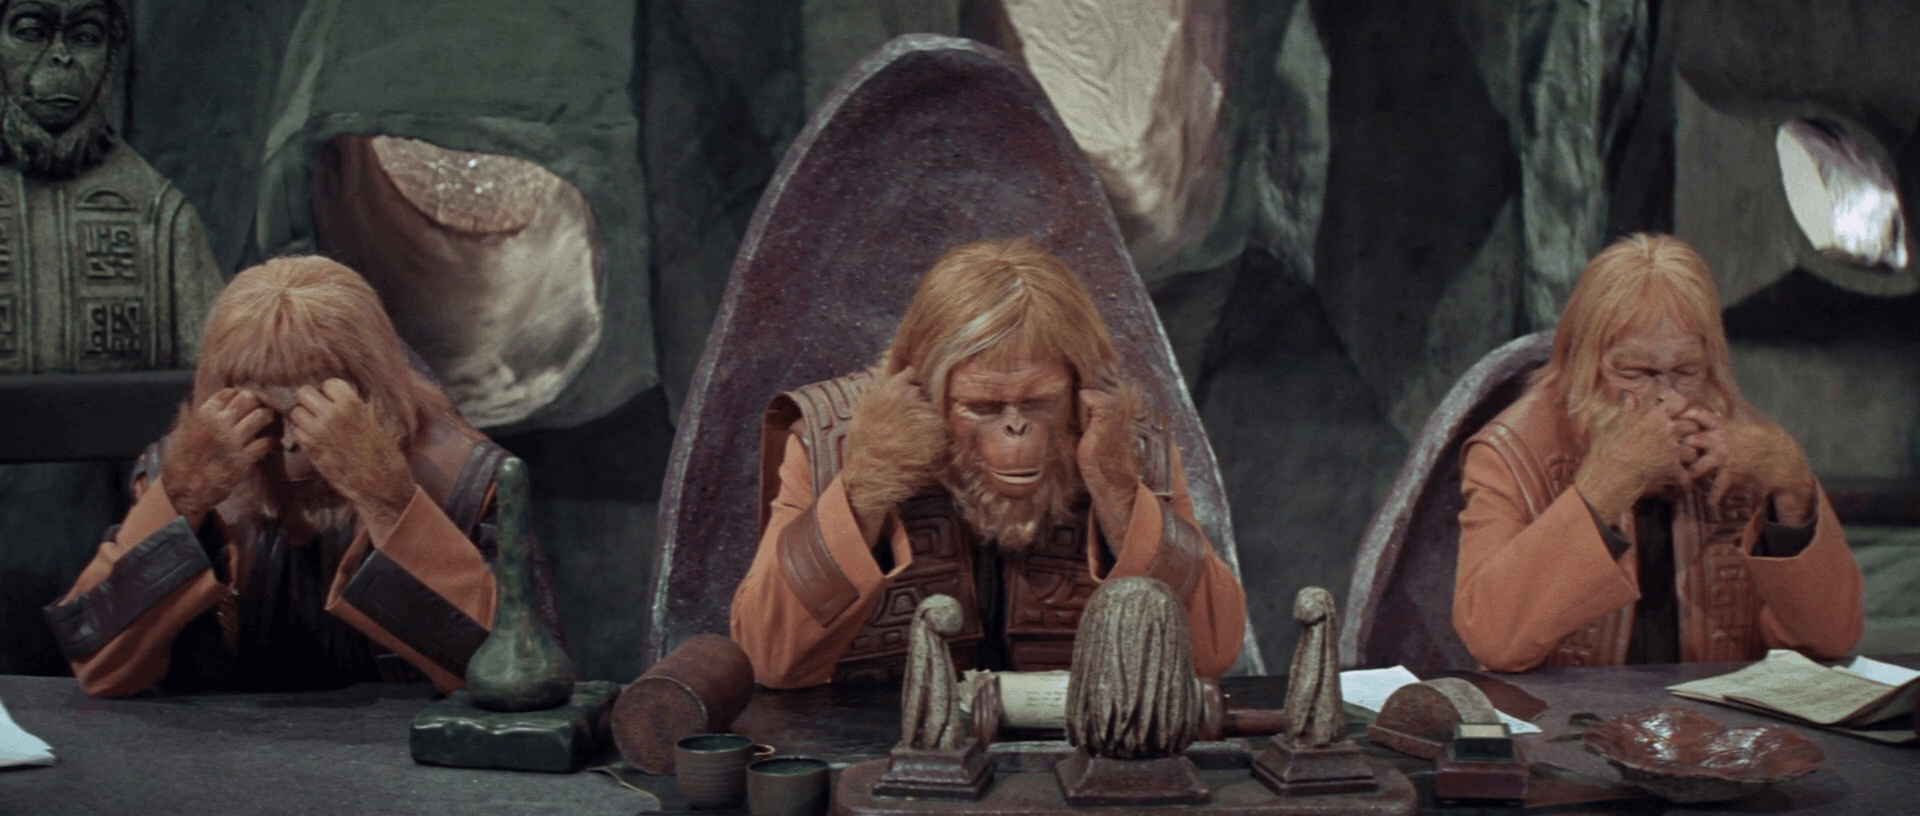 Planet of the Apes (1968) HD Wallpaper. Background